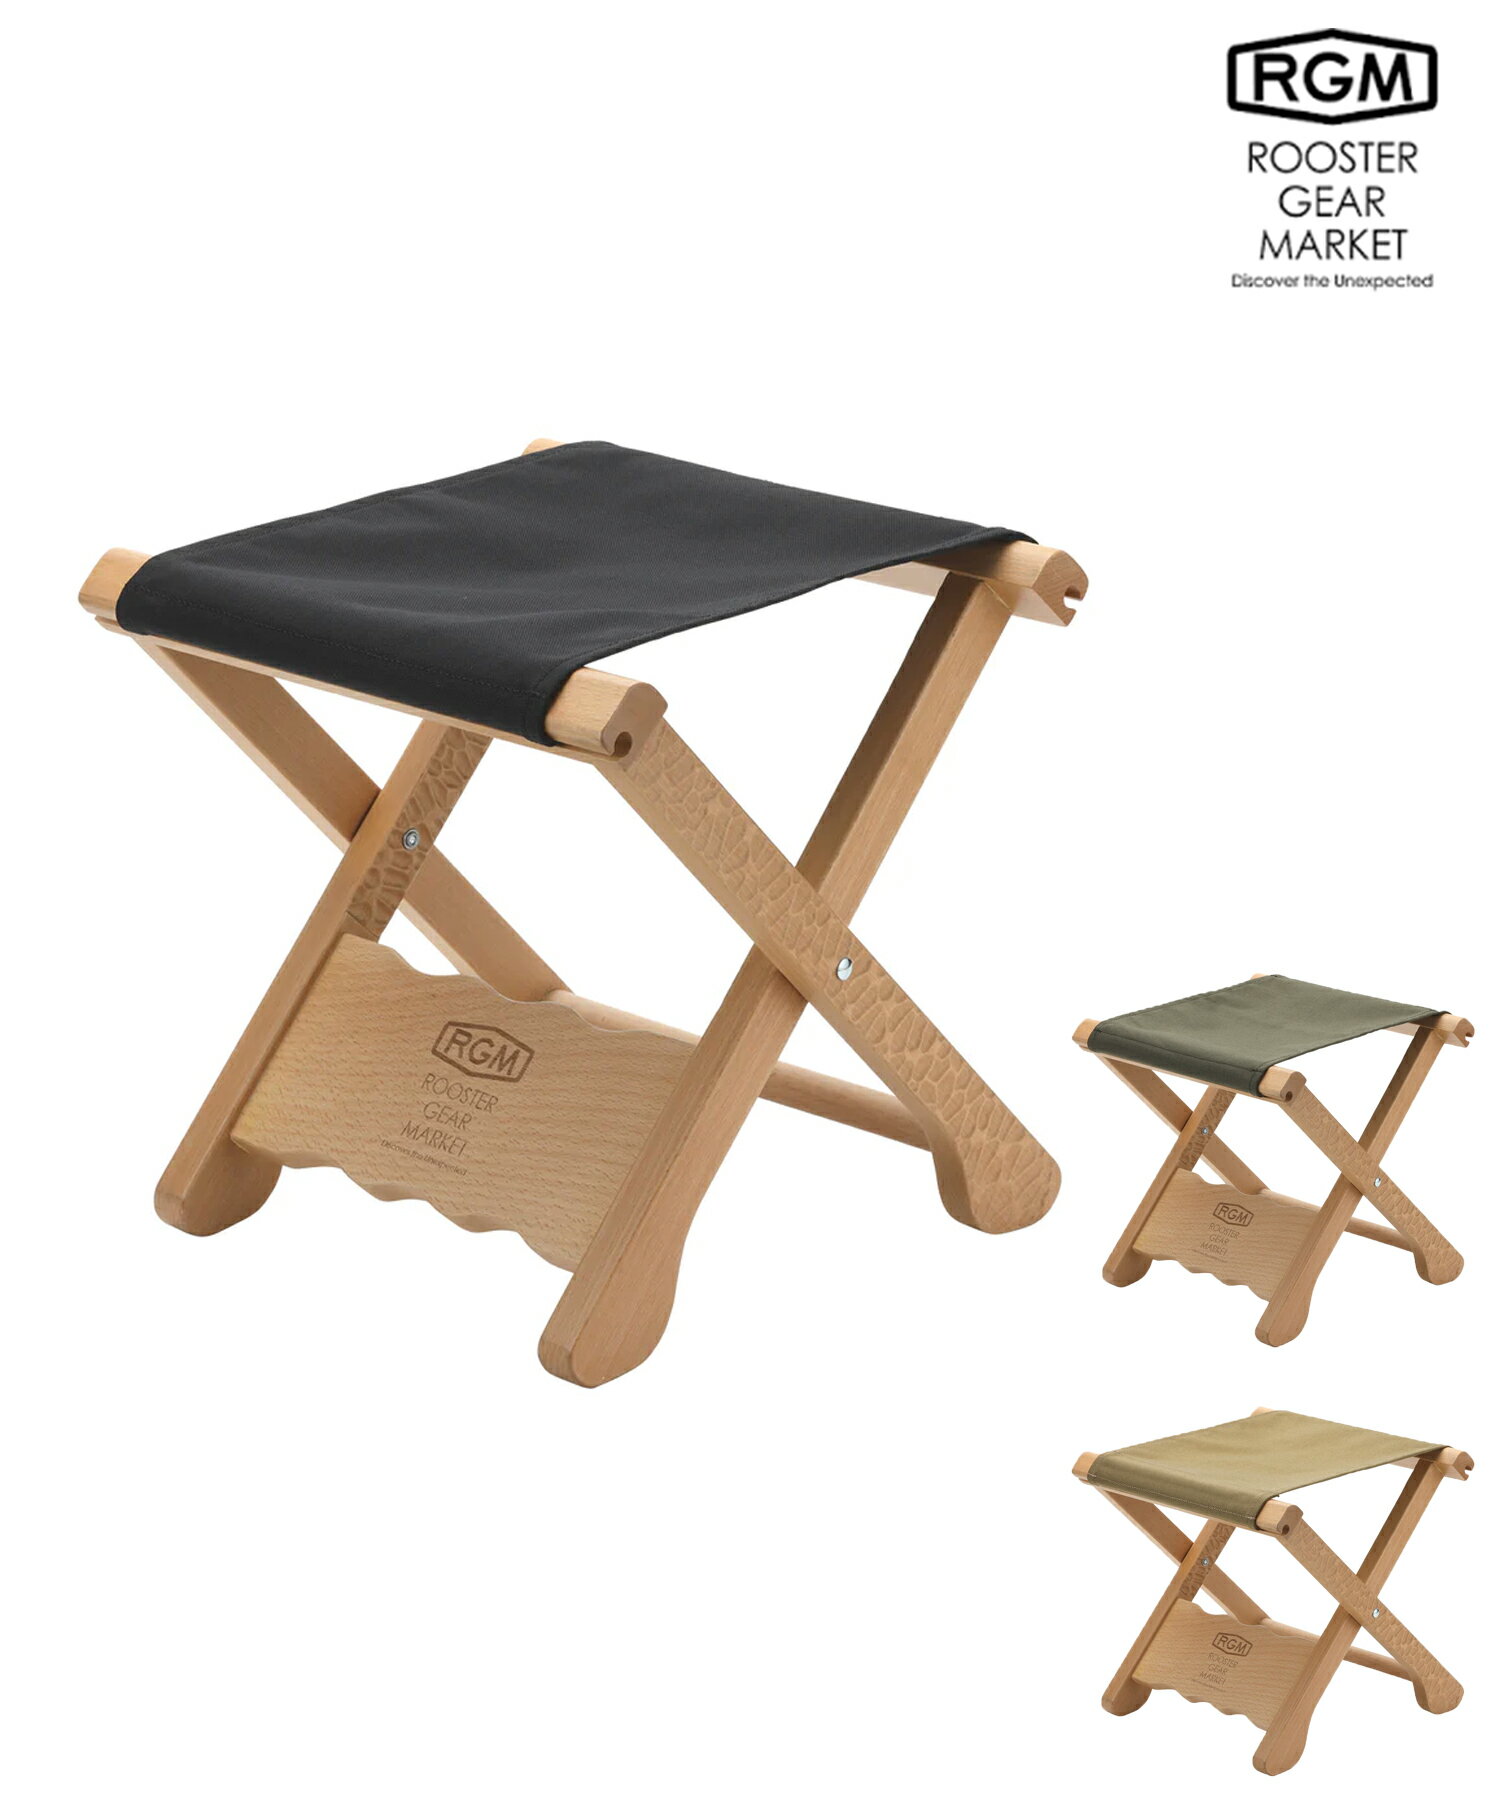 ROOSTER GEAR MARKET ルースターギアマーケット WOOD STOOL 折り畳み 椅子 コンパクト ムラサキスポーツ